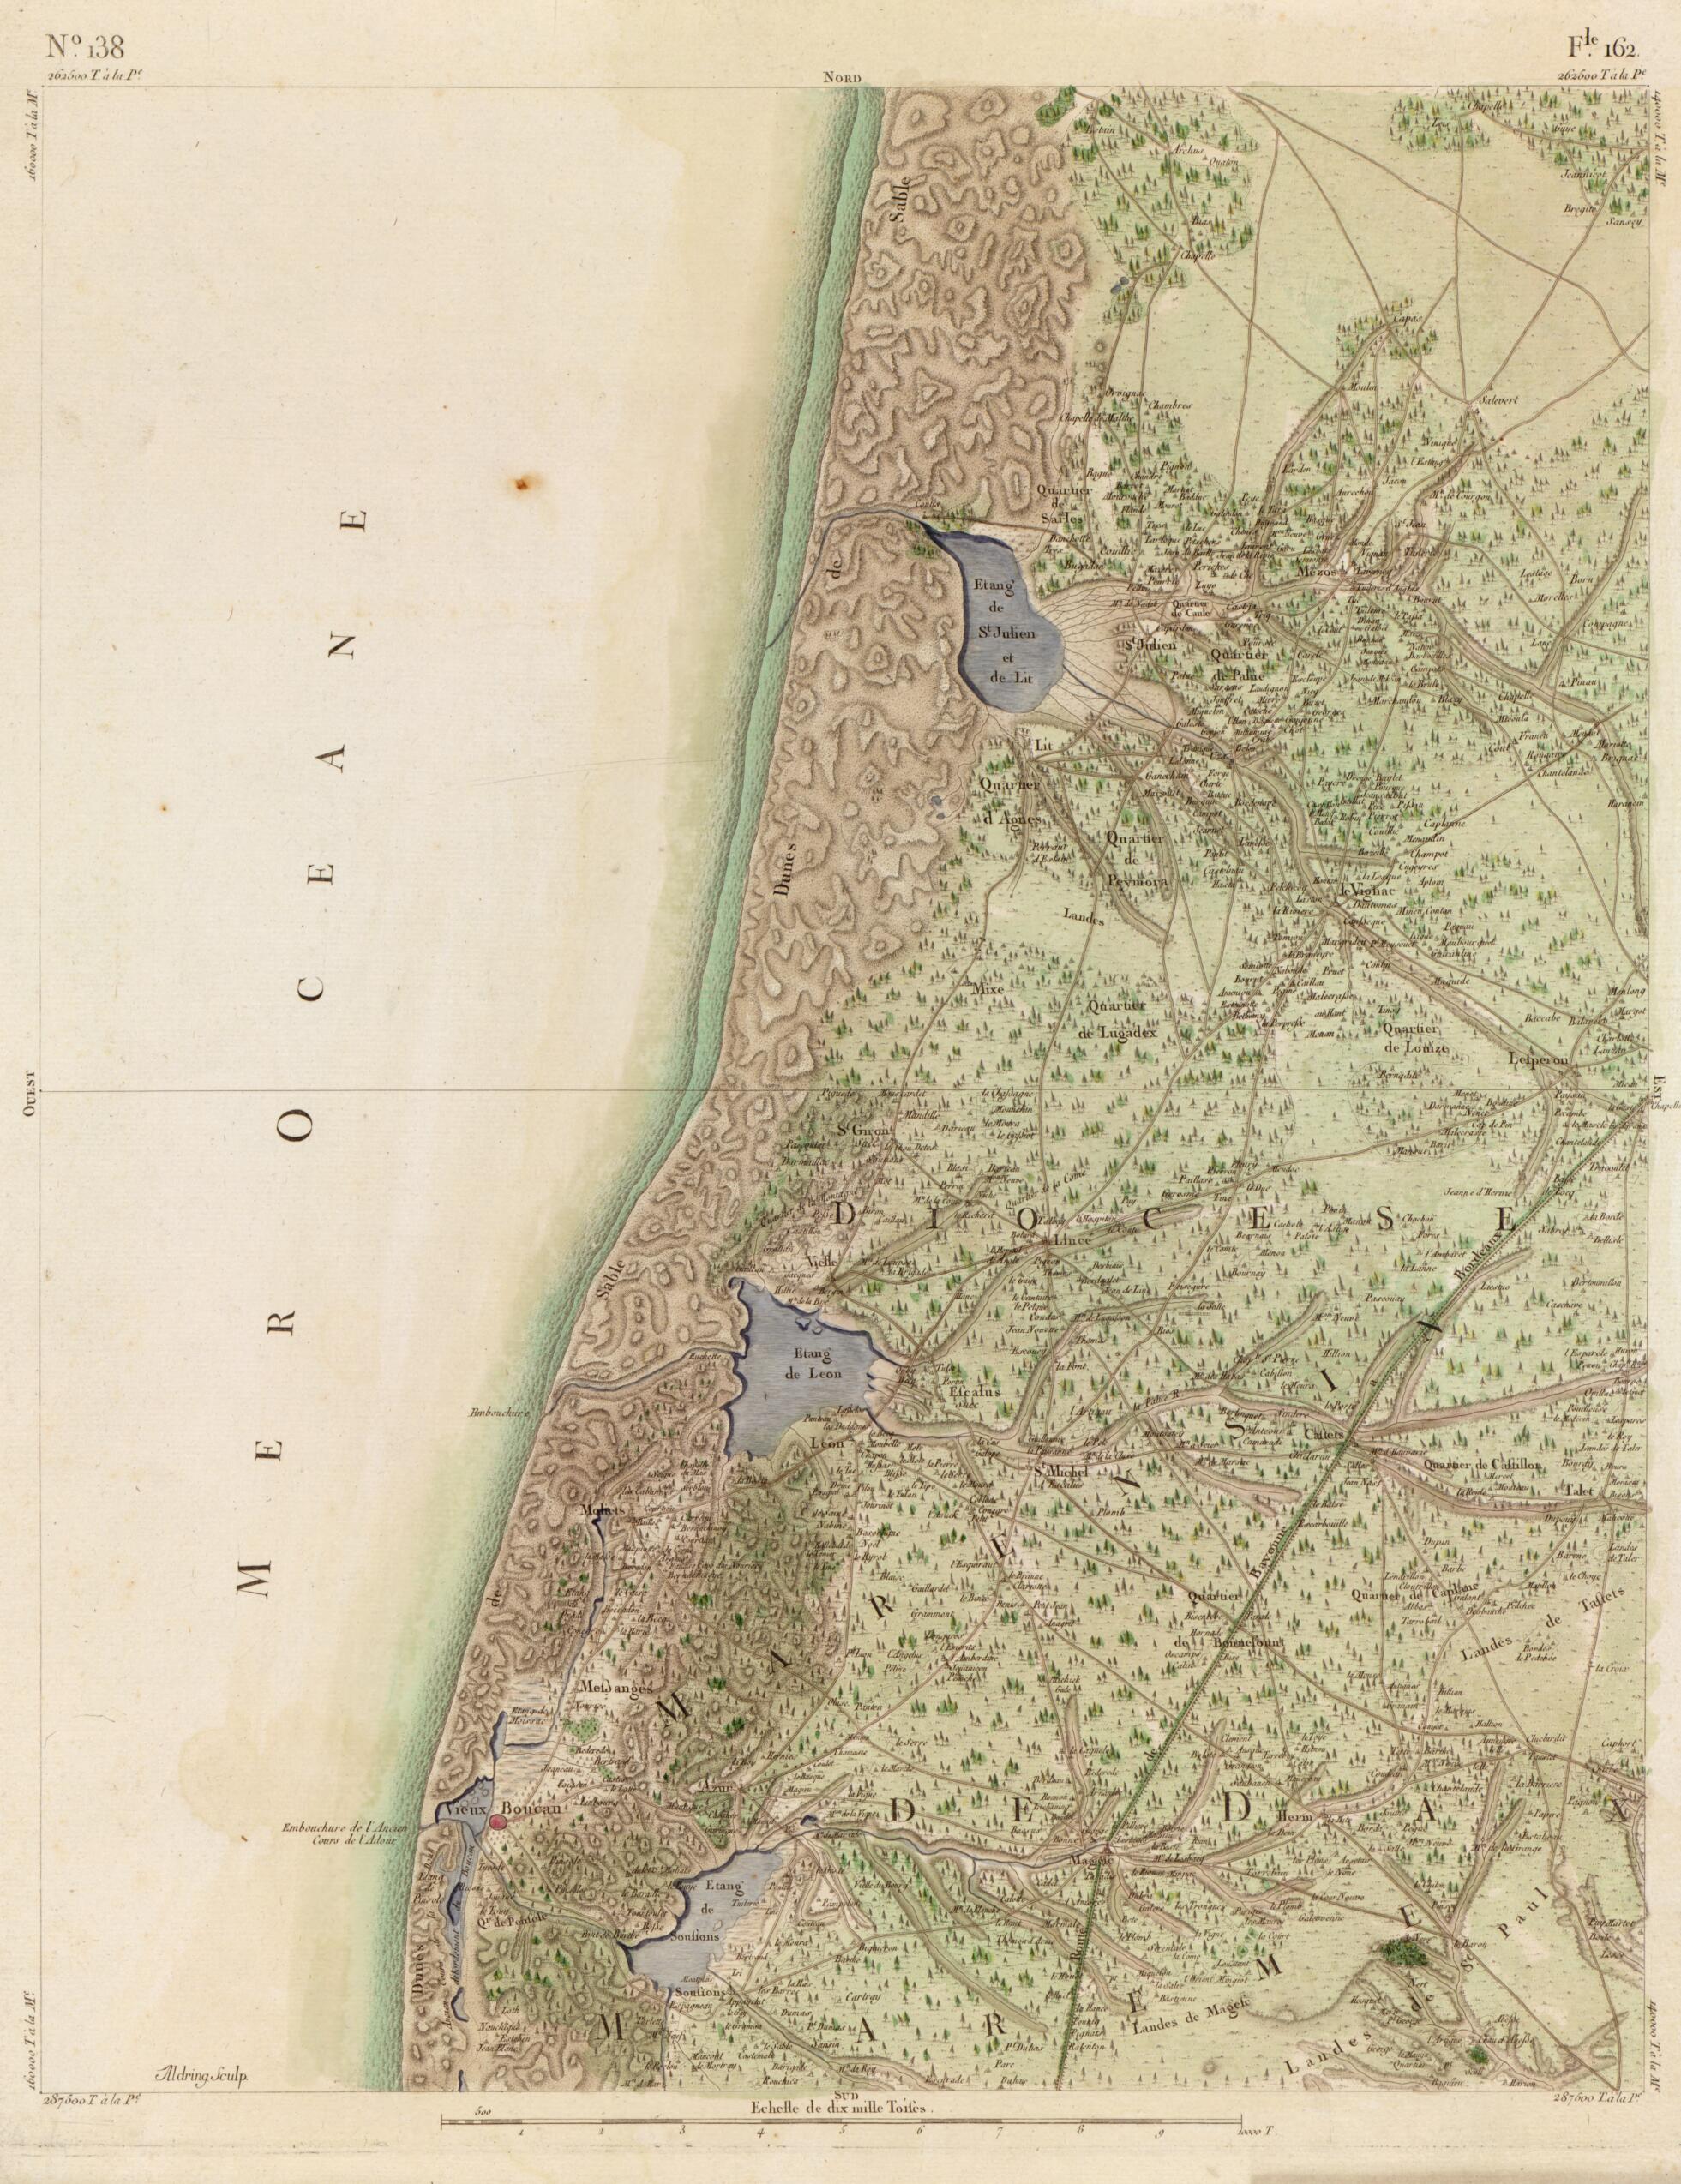 This old map of Image 143 from Carte De France from 1756 was created by  Société De La Carte De France in 1756